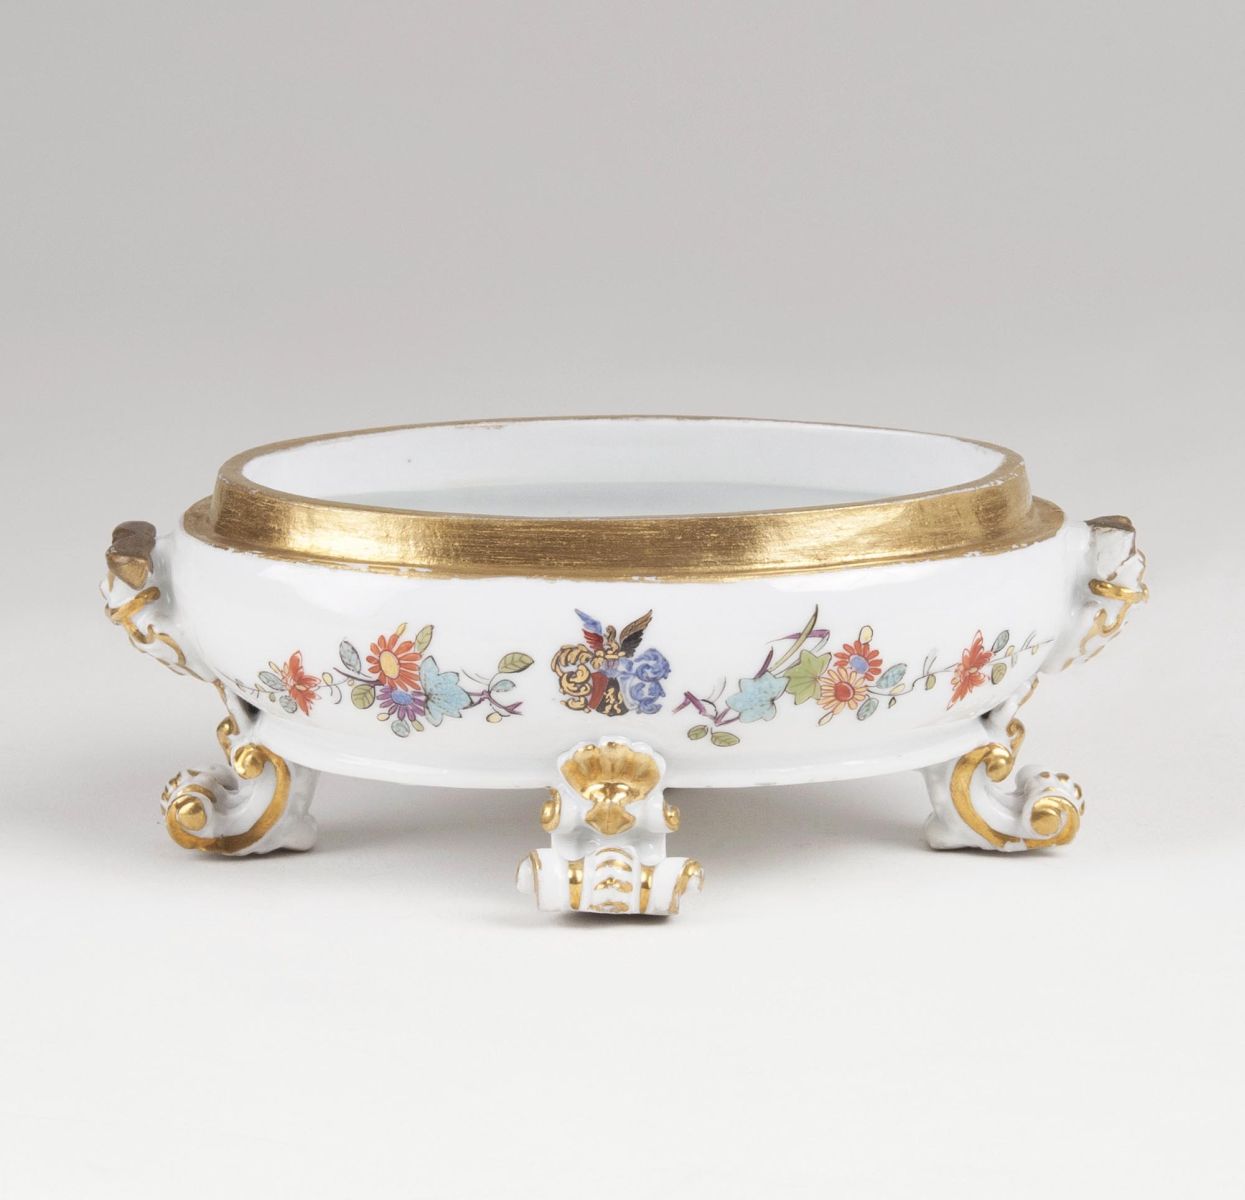 A Small Bowl with Coat of Arms 'Hennicke'